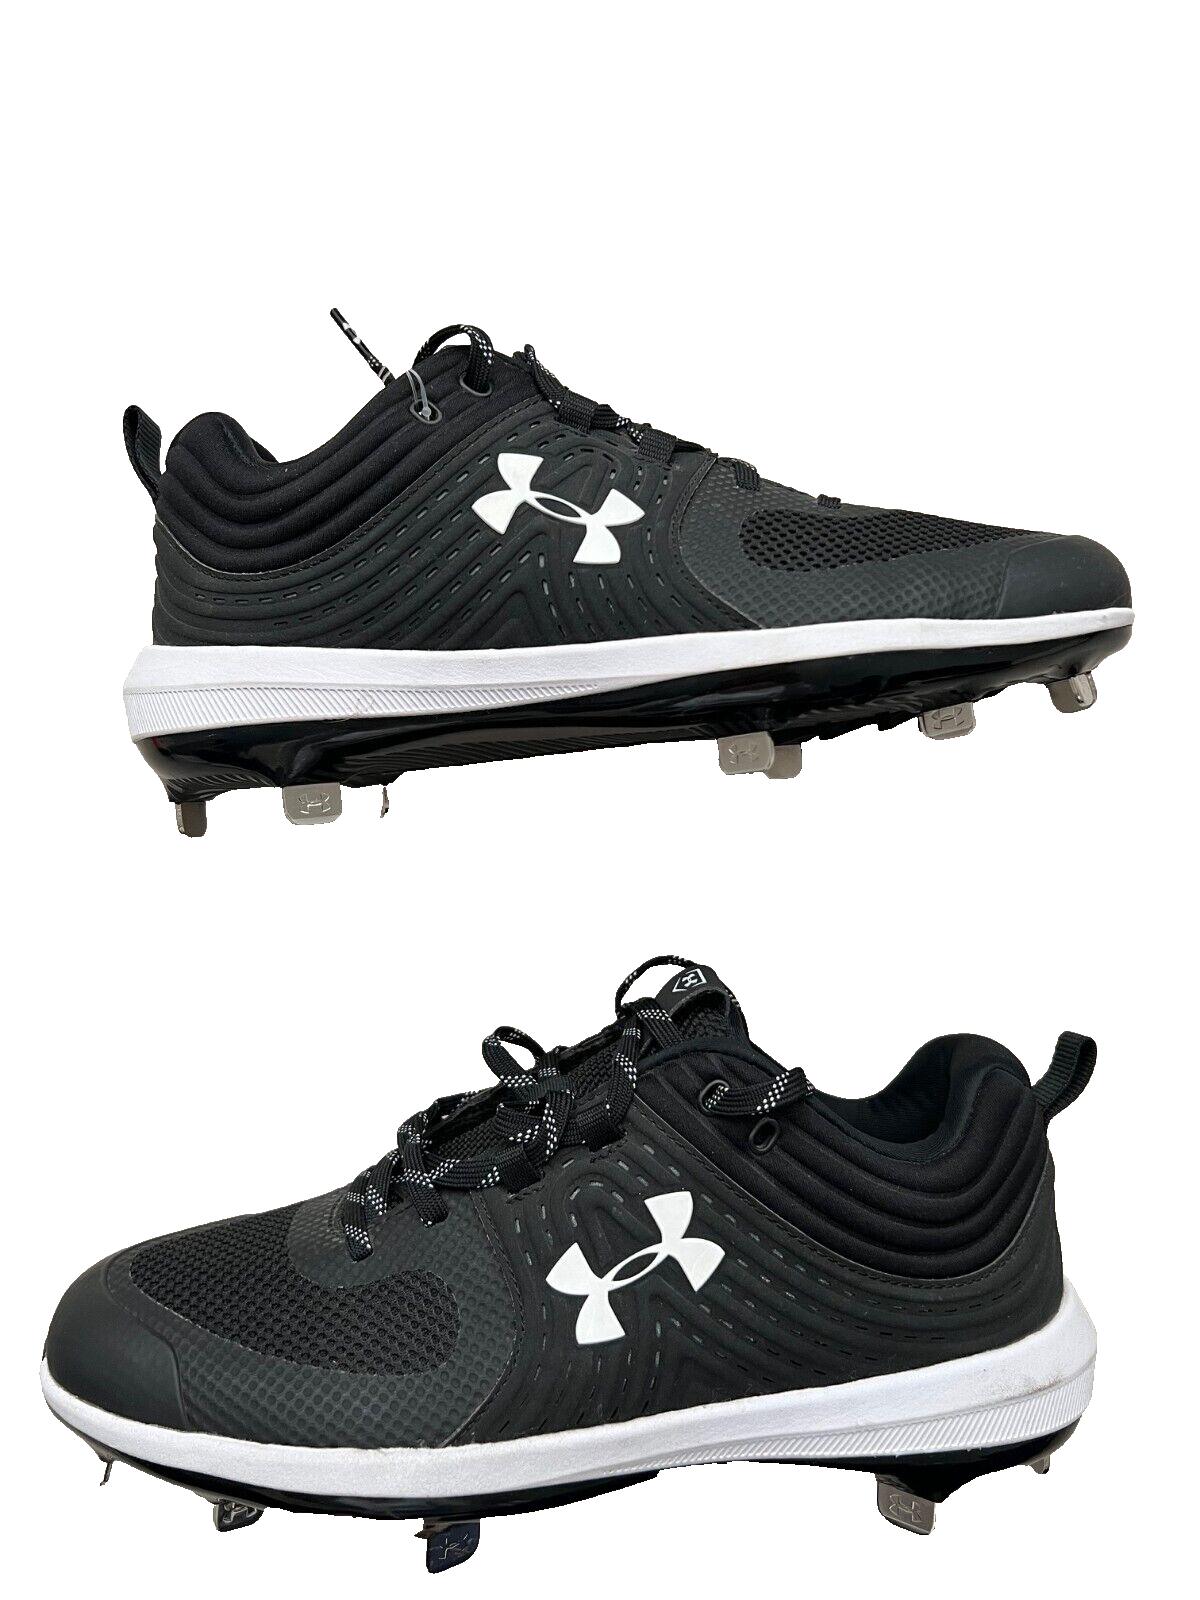 Under Armour 3022074 Women's Glyde Low Metal Softball Cleats ( 8 ) - $128.67